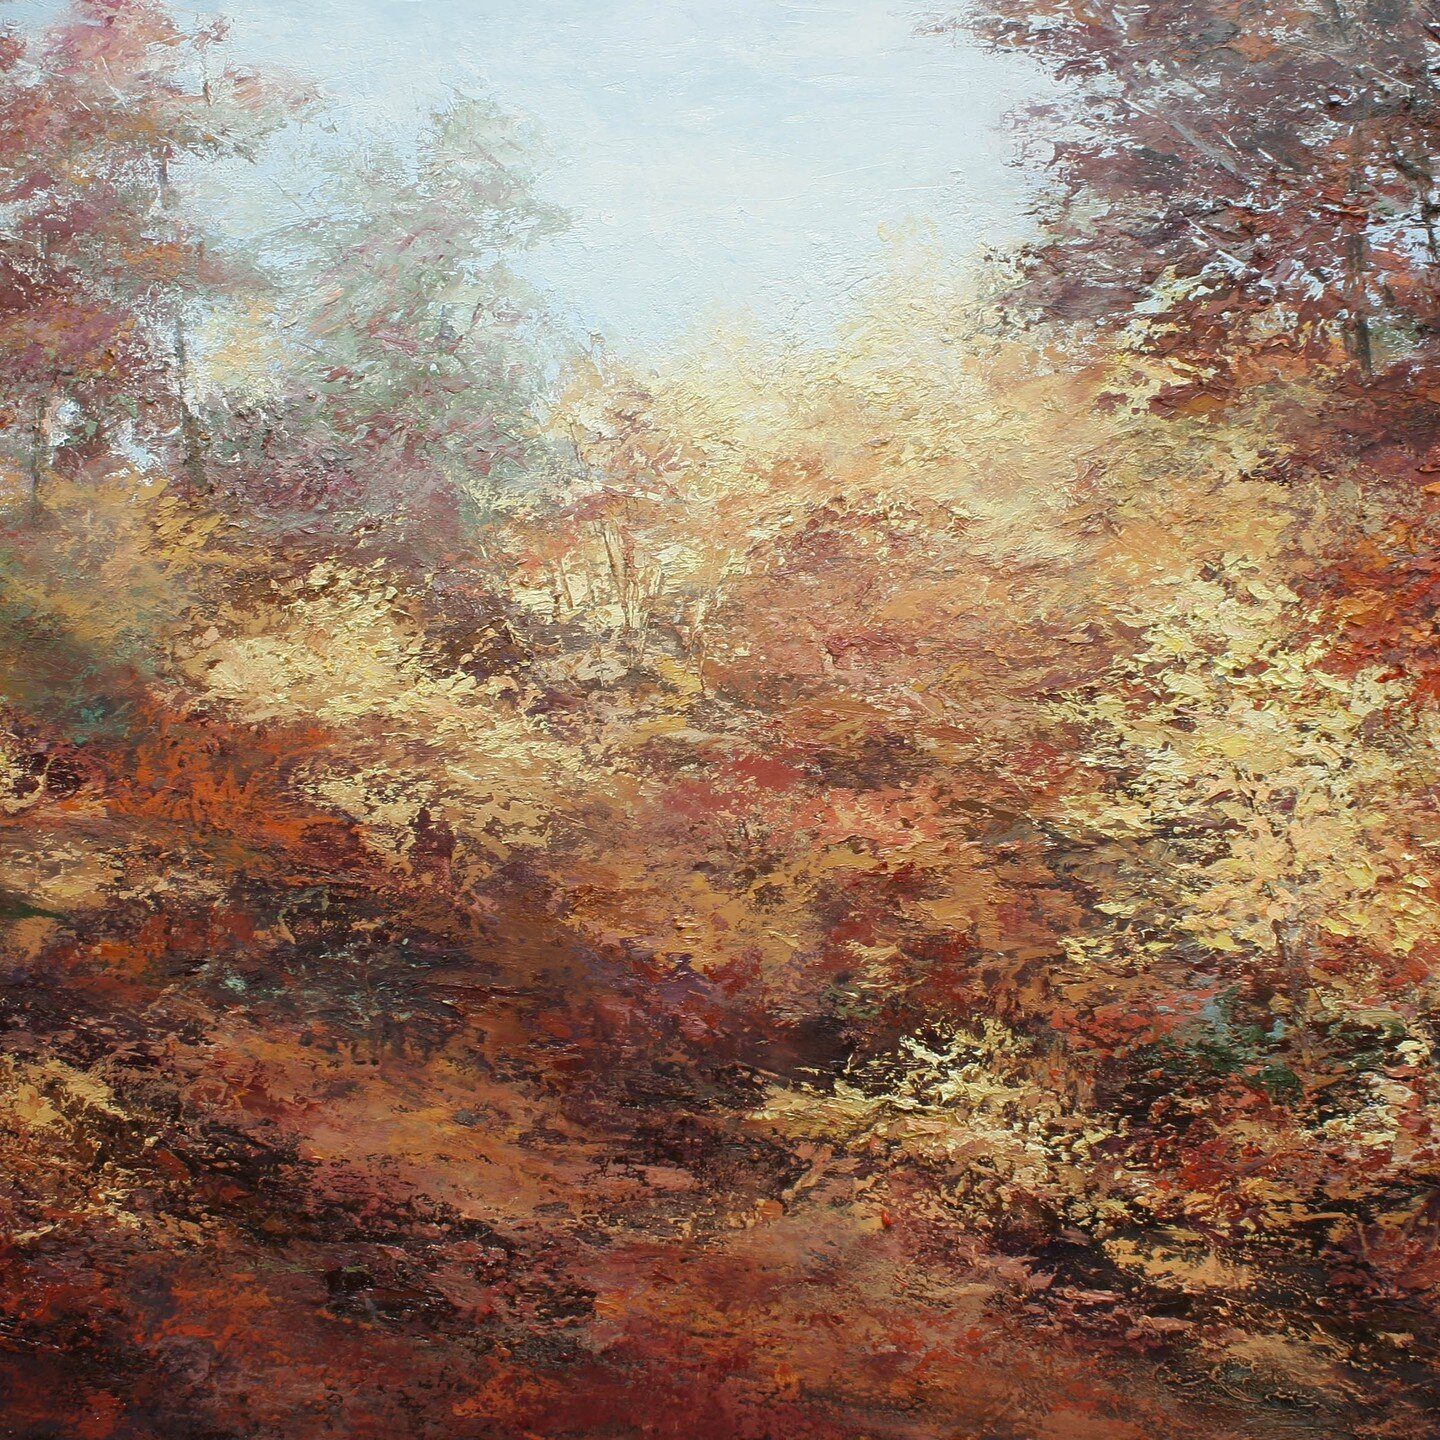 &quot;Color Spectacular&quot; is an oil painting now in the Grace Mills River juried exhibition until January 11,2023.